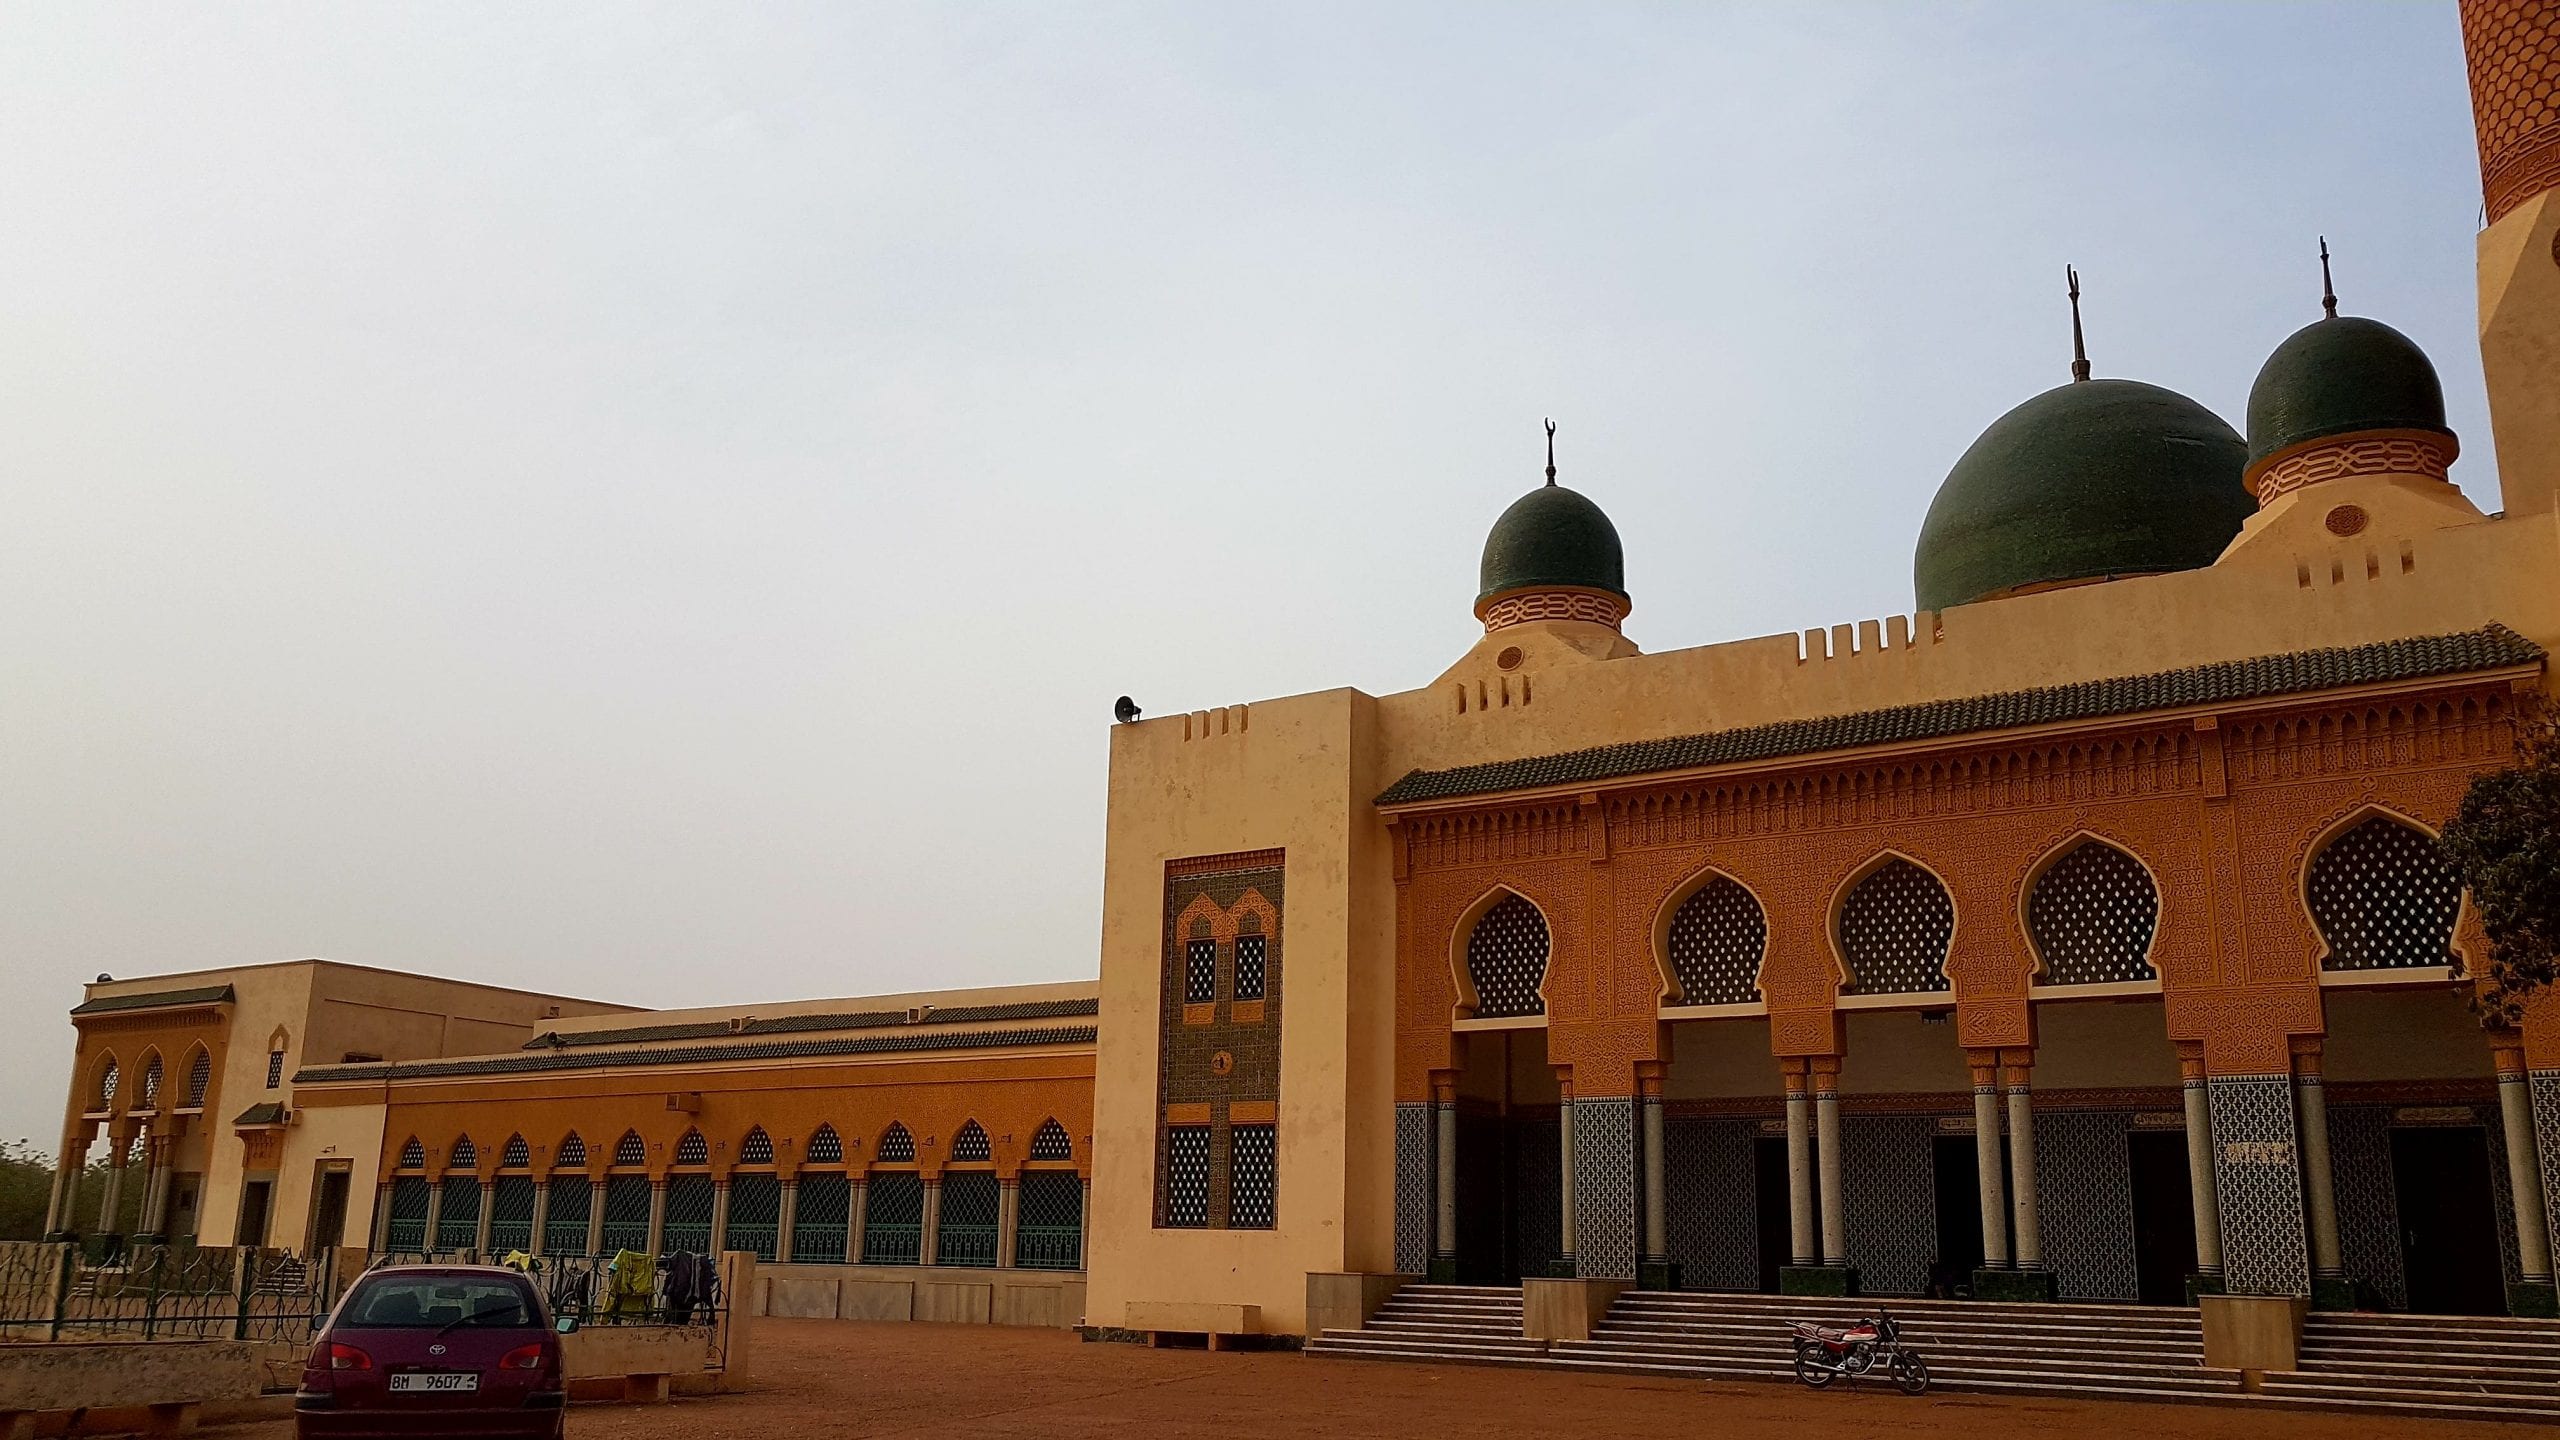 Must Visit Attractions in Niamey: Grand Mosque of Niamey